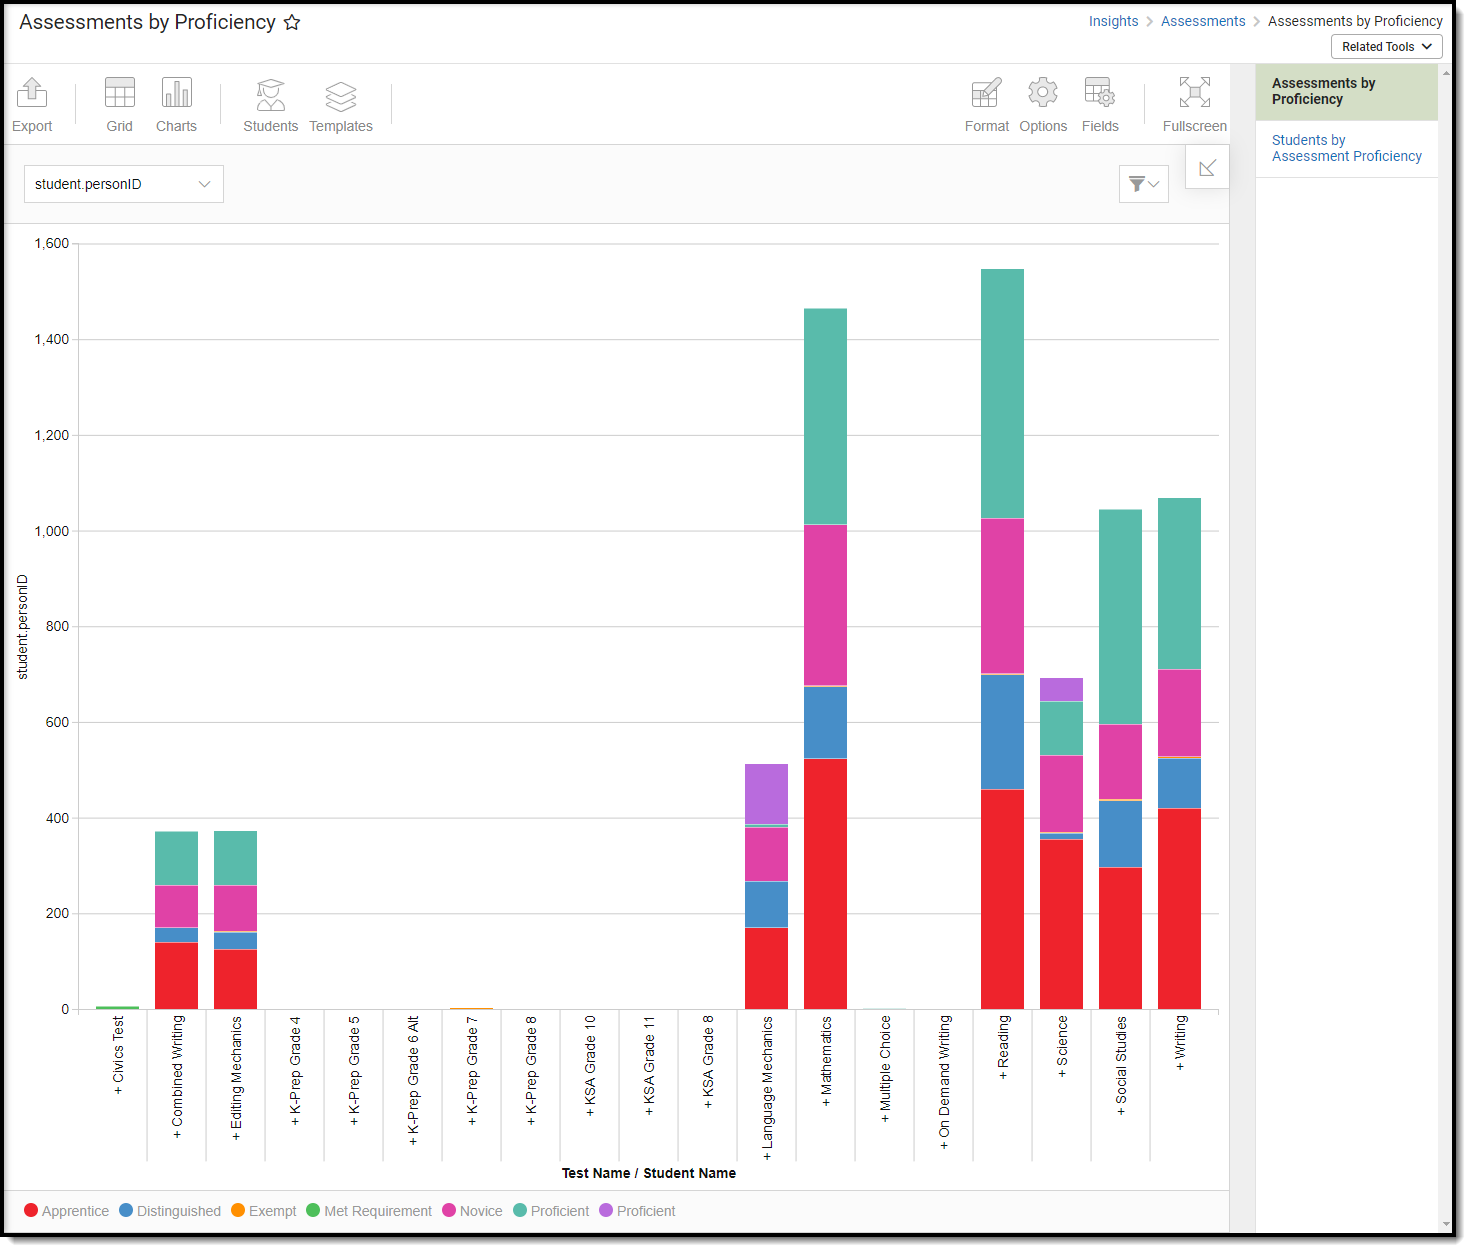 screenshot of the assessments by proficiency visualization